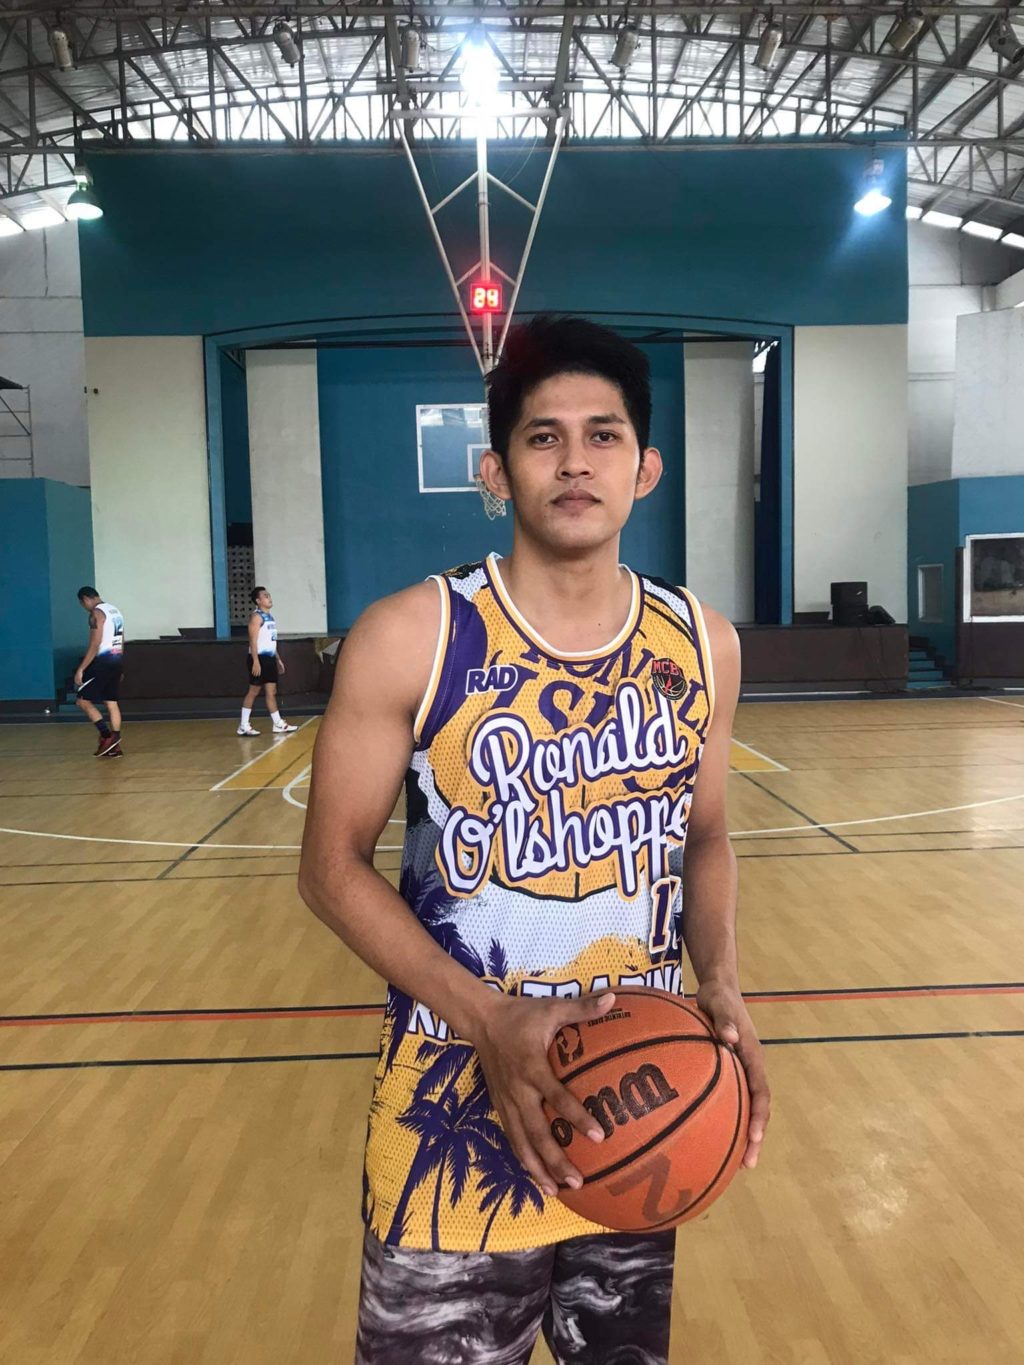 MCBL ACTION. Emmanuel Villamor of Ronald O'lshoppe is the highest scorer of the game as he towed his team to victory during a grueling battle with the Spartans at the Metro Cebu Basketball League on Saturday, July 2. | Photo from MCBL